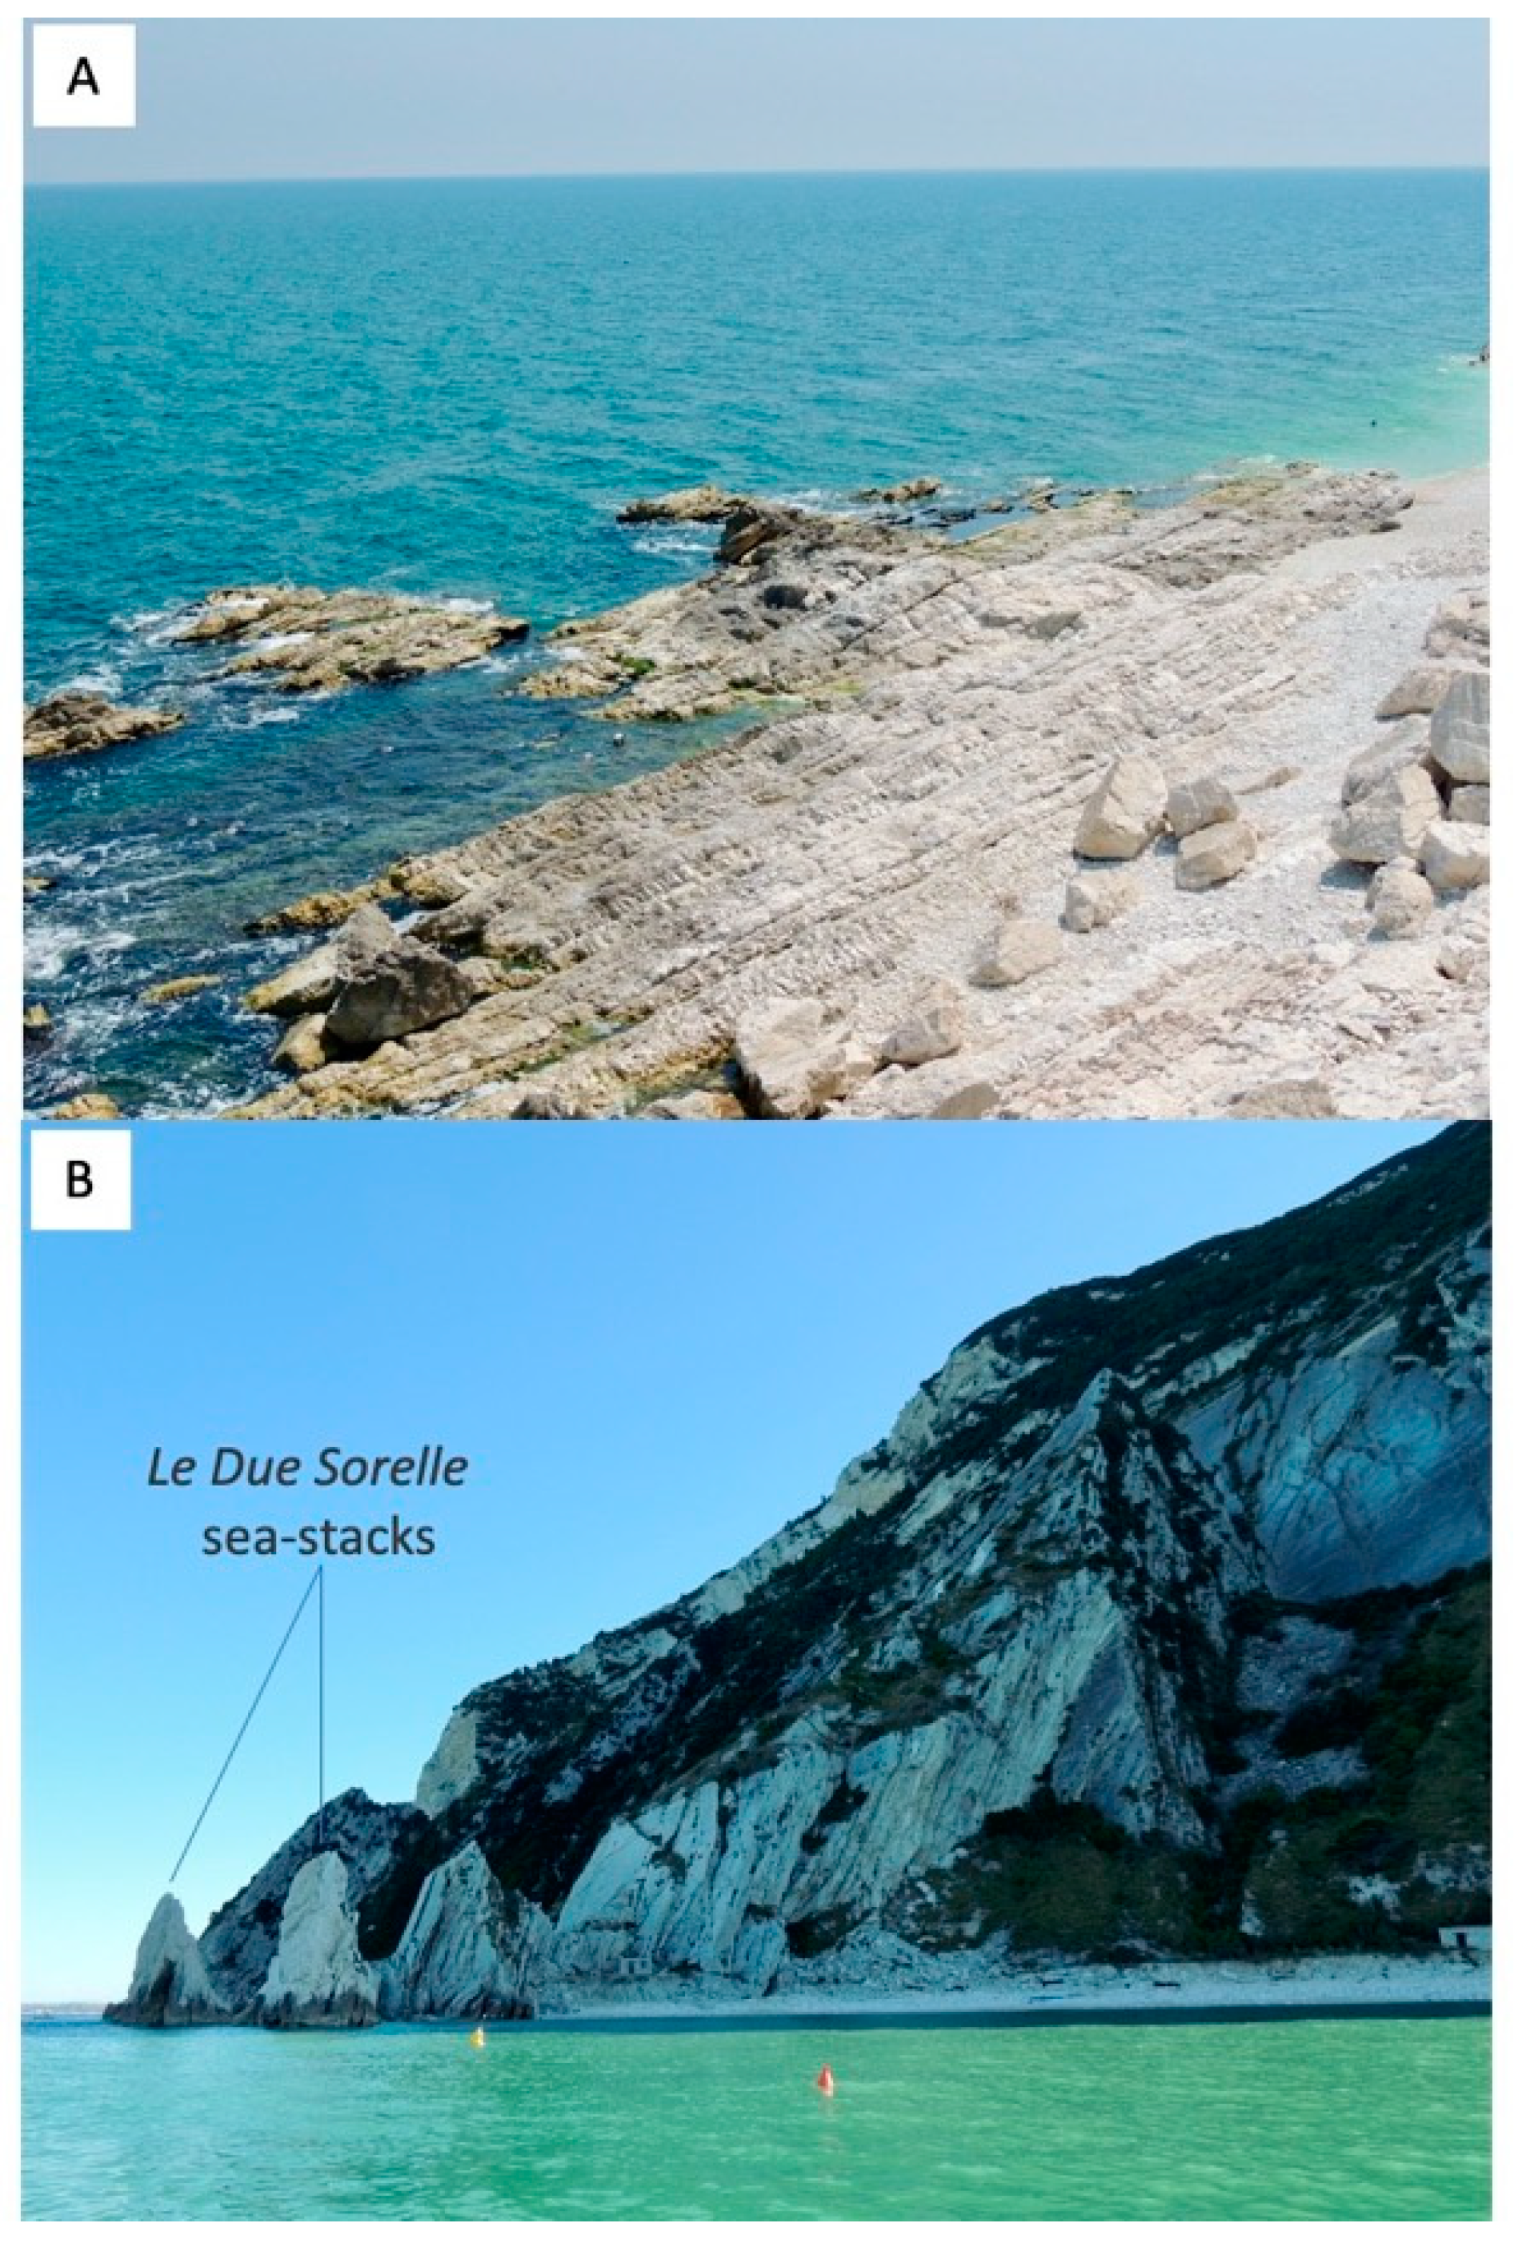 Applied Sciences Free Full Text Integrated Field Surveying And Land Surface Quantitative Analysis To Assess Landslide Proneness In The Conero Promontory Rocky Coast Italy Html